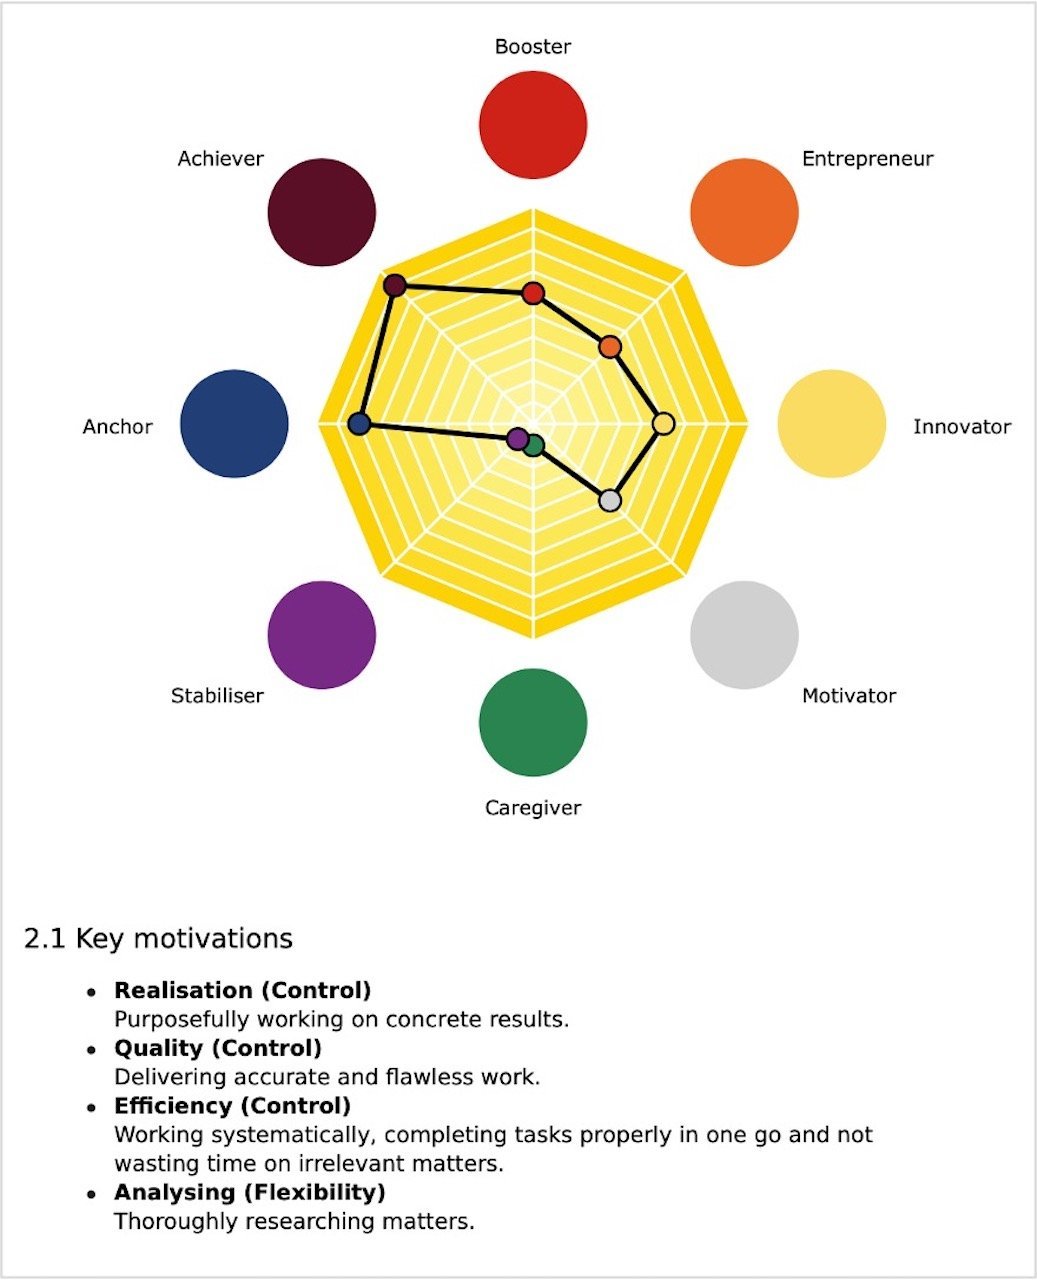 Spidergram showing a candidates motivations and role